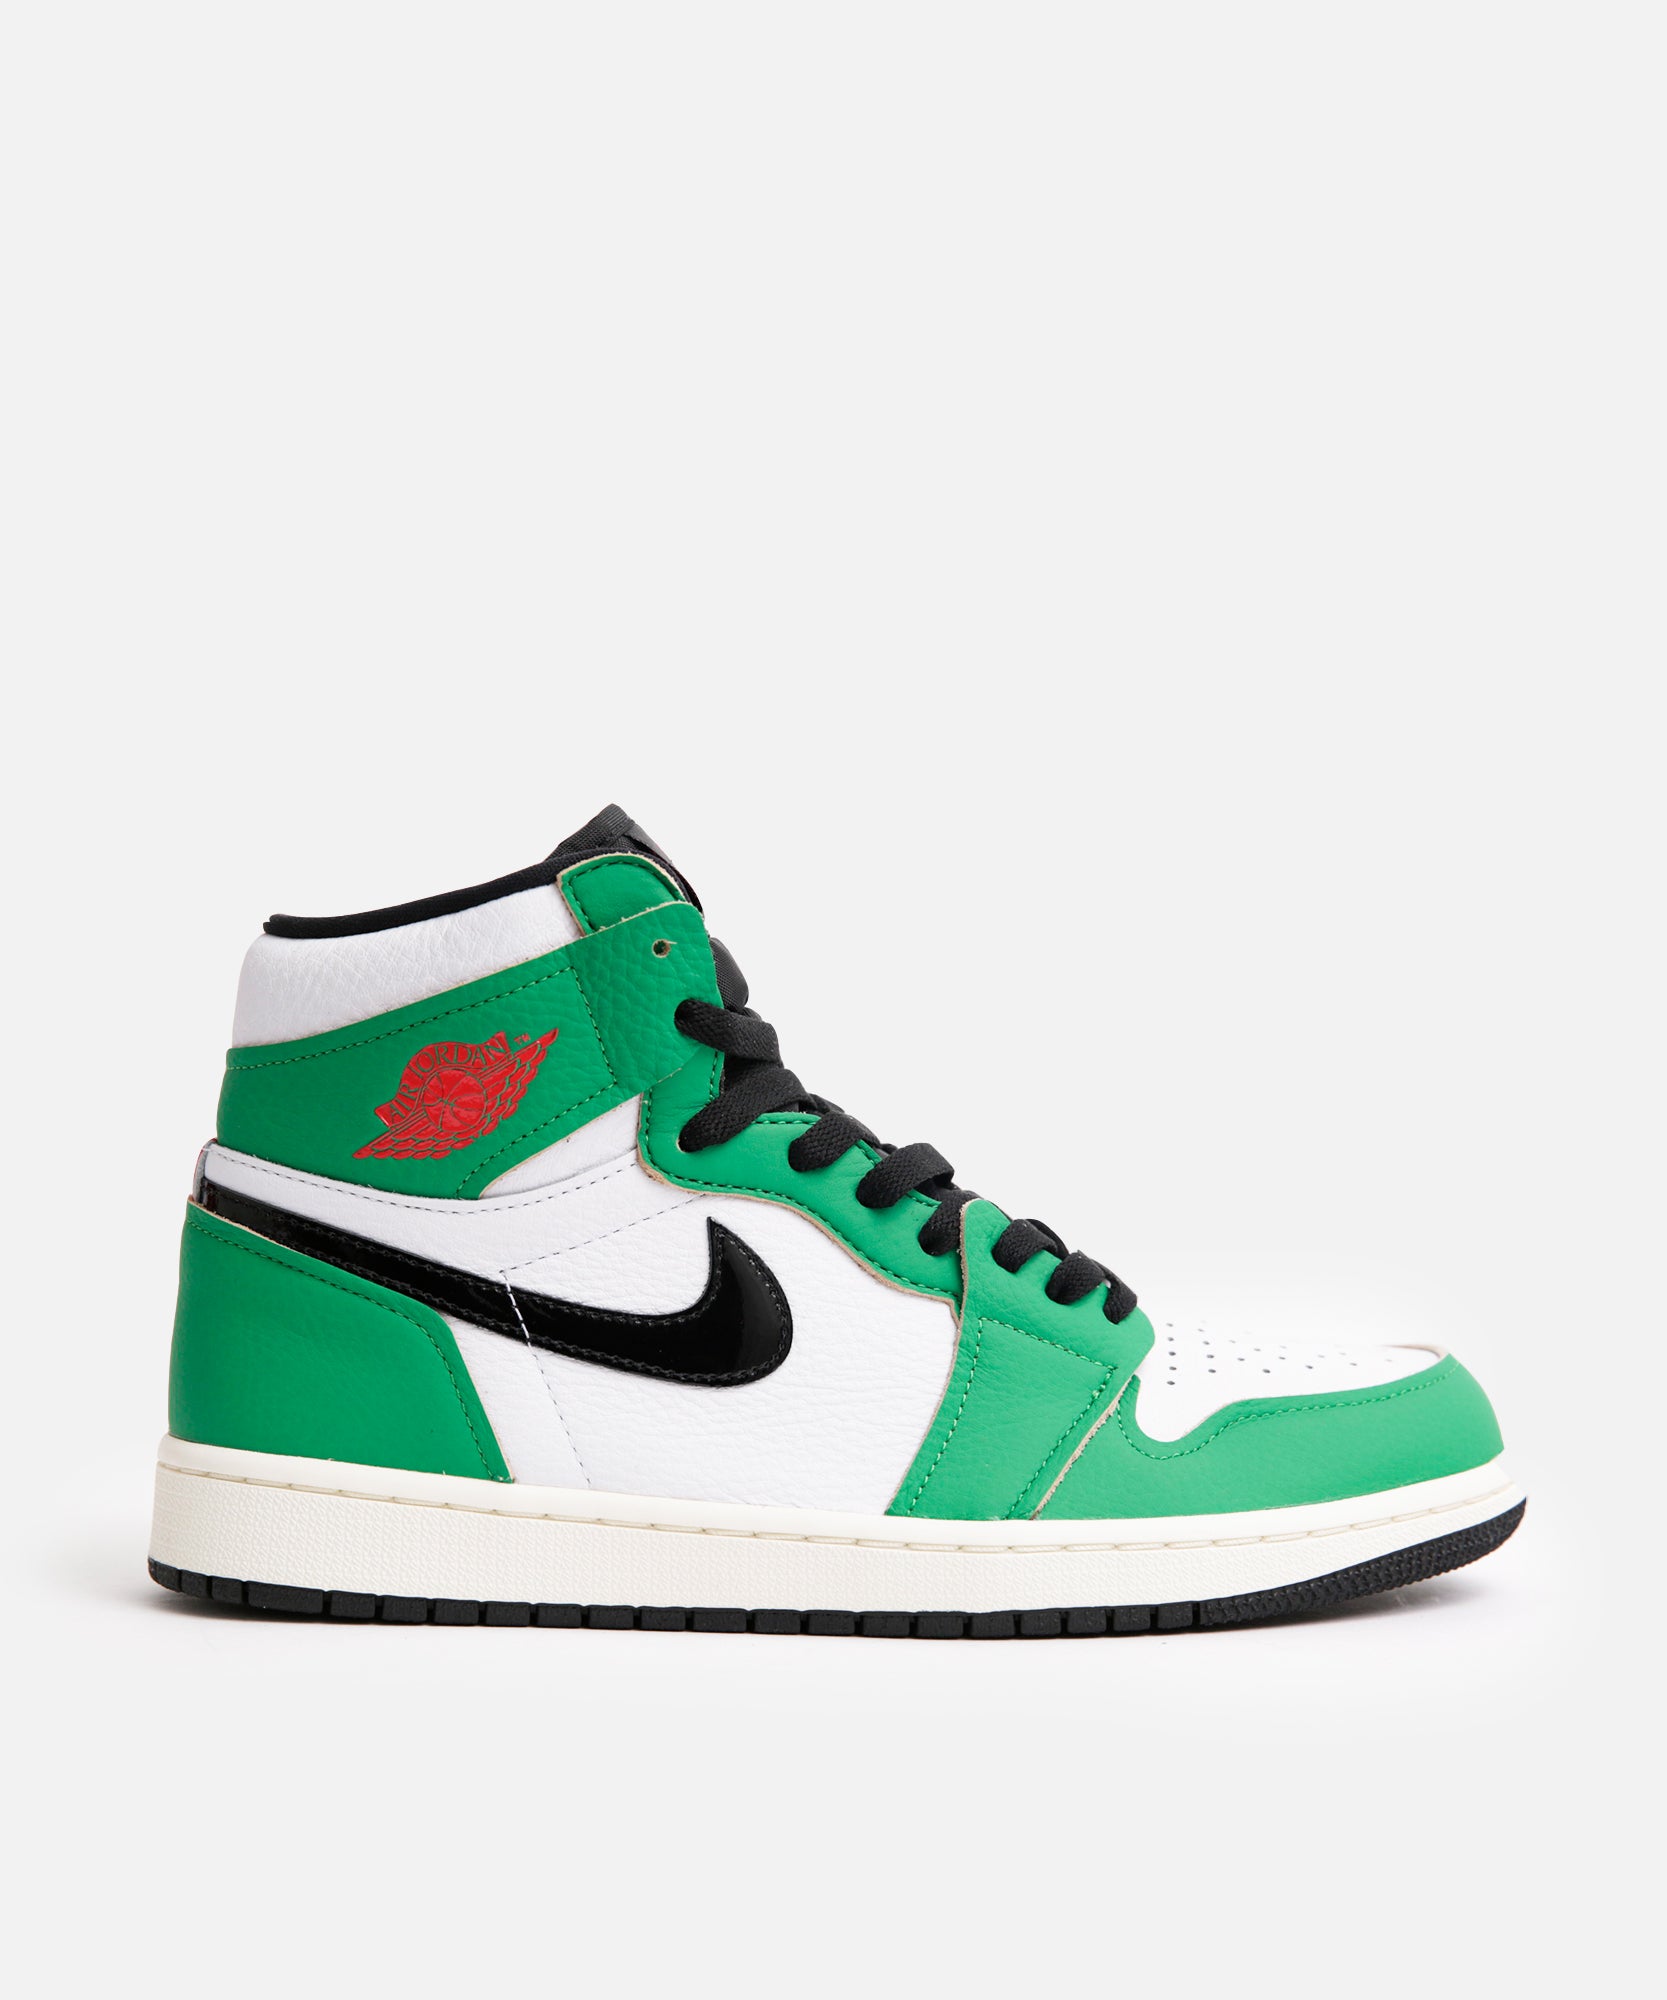 jordan 1 green and black and white